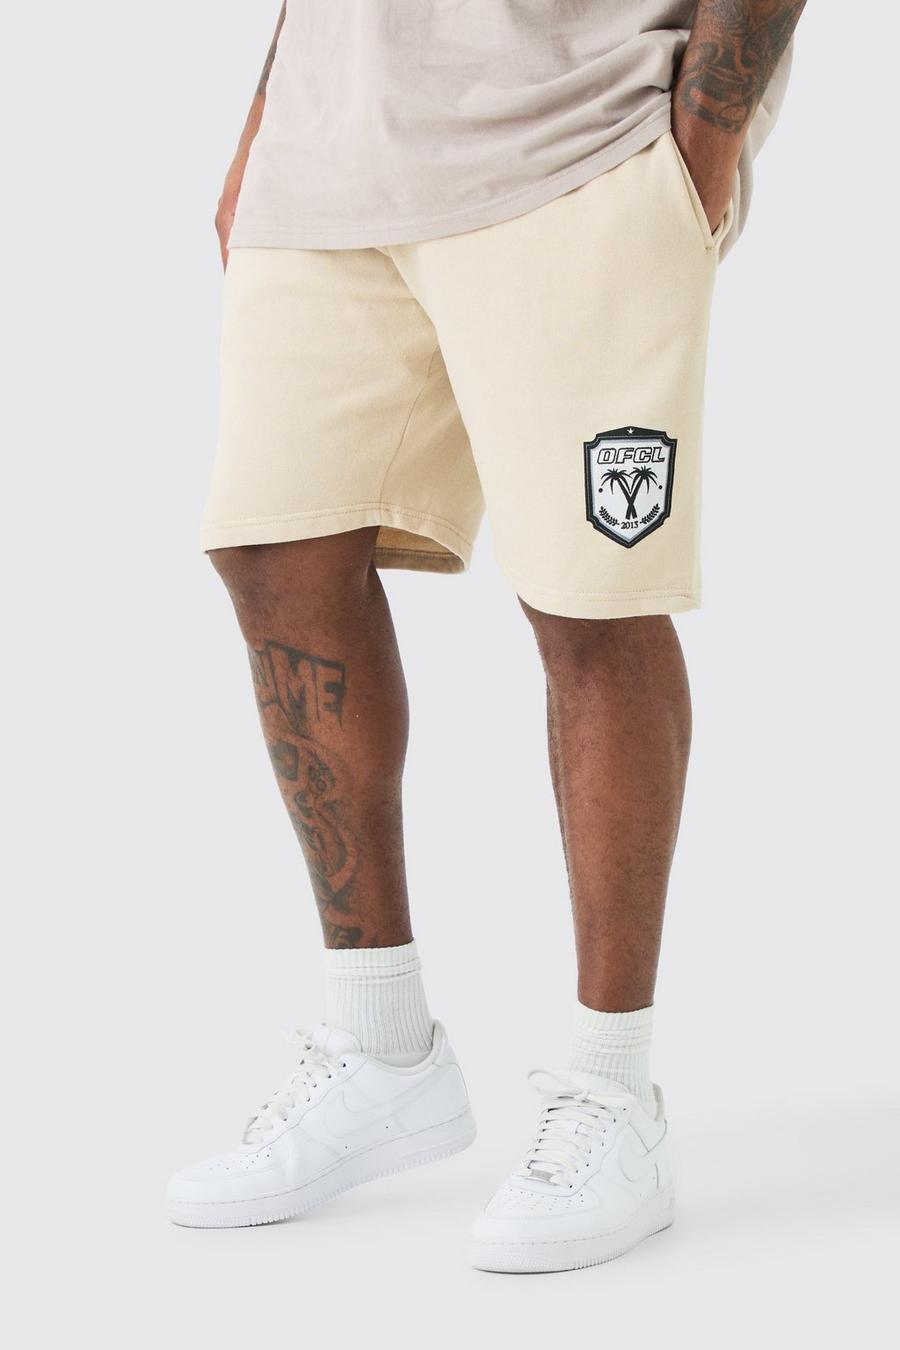 Plus Team Ofcl Loose fit shorts i sand